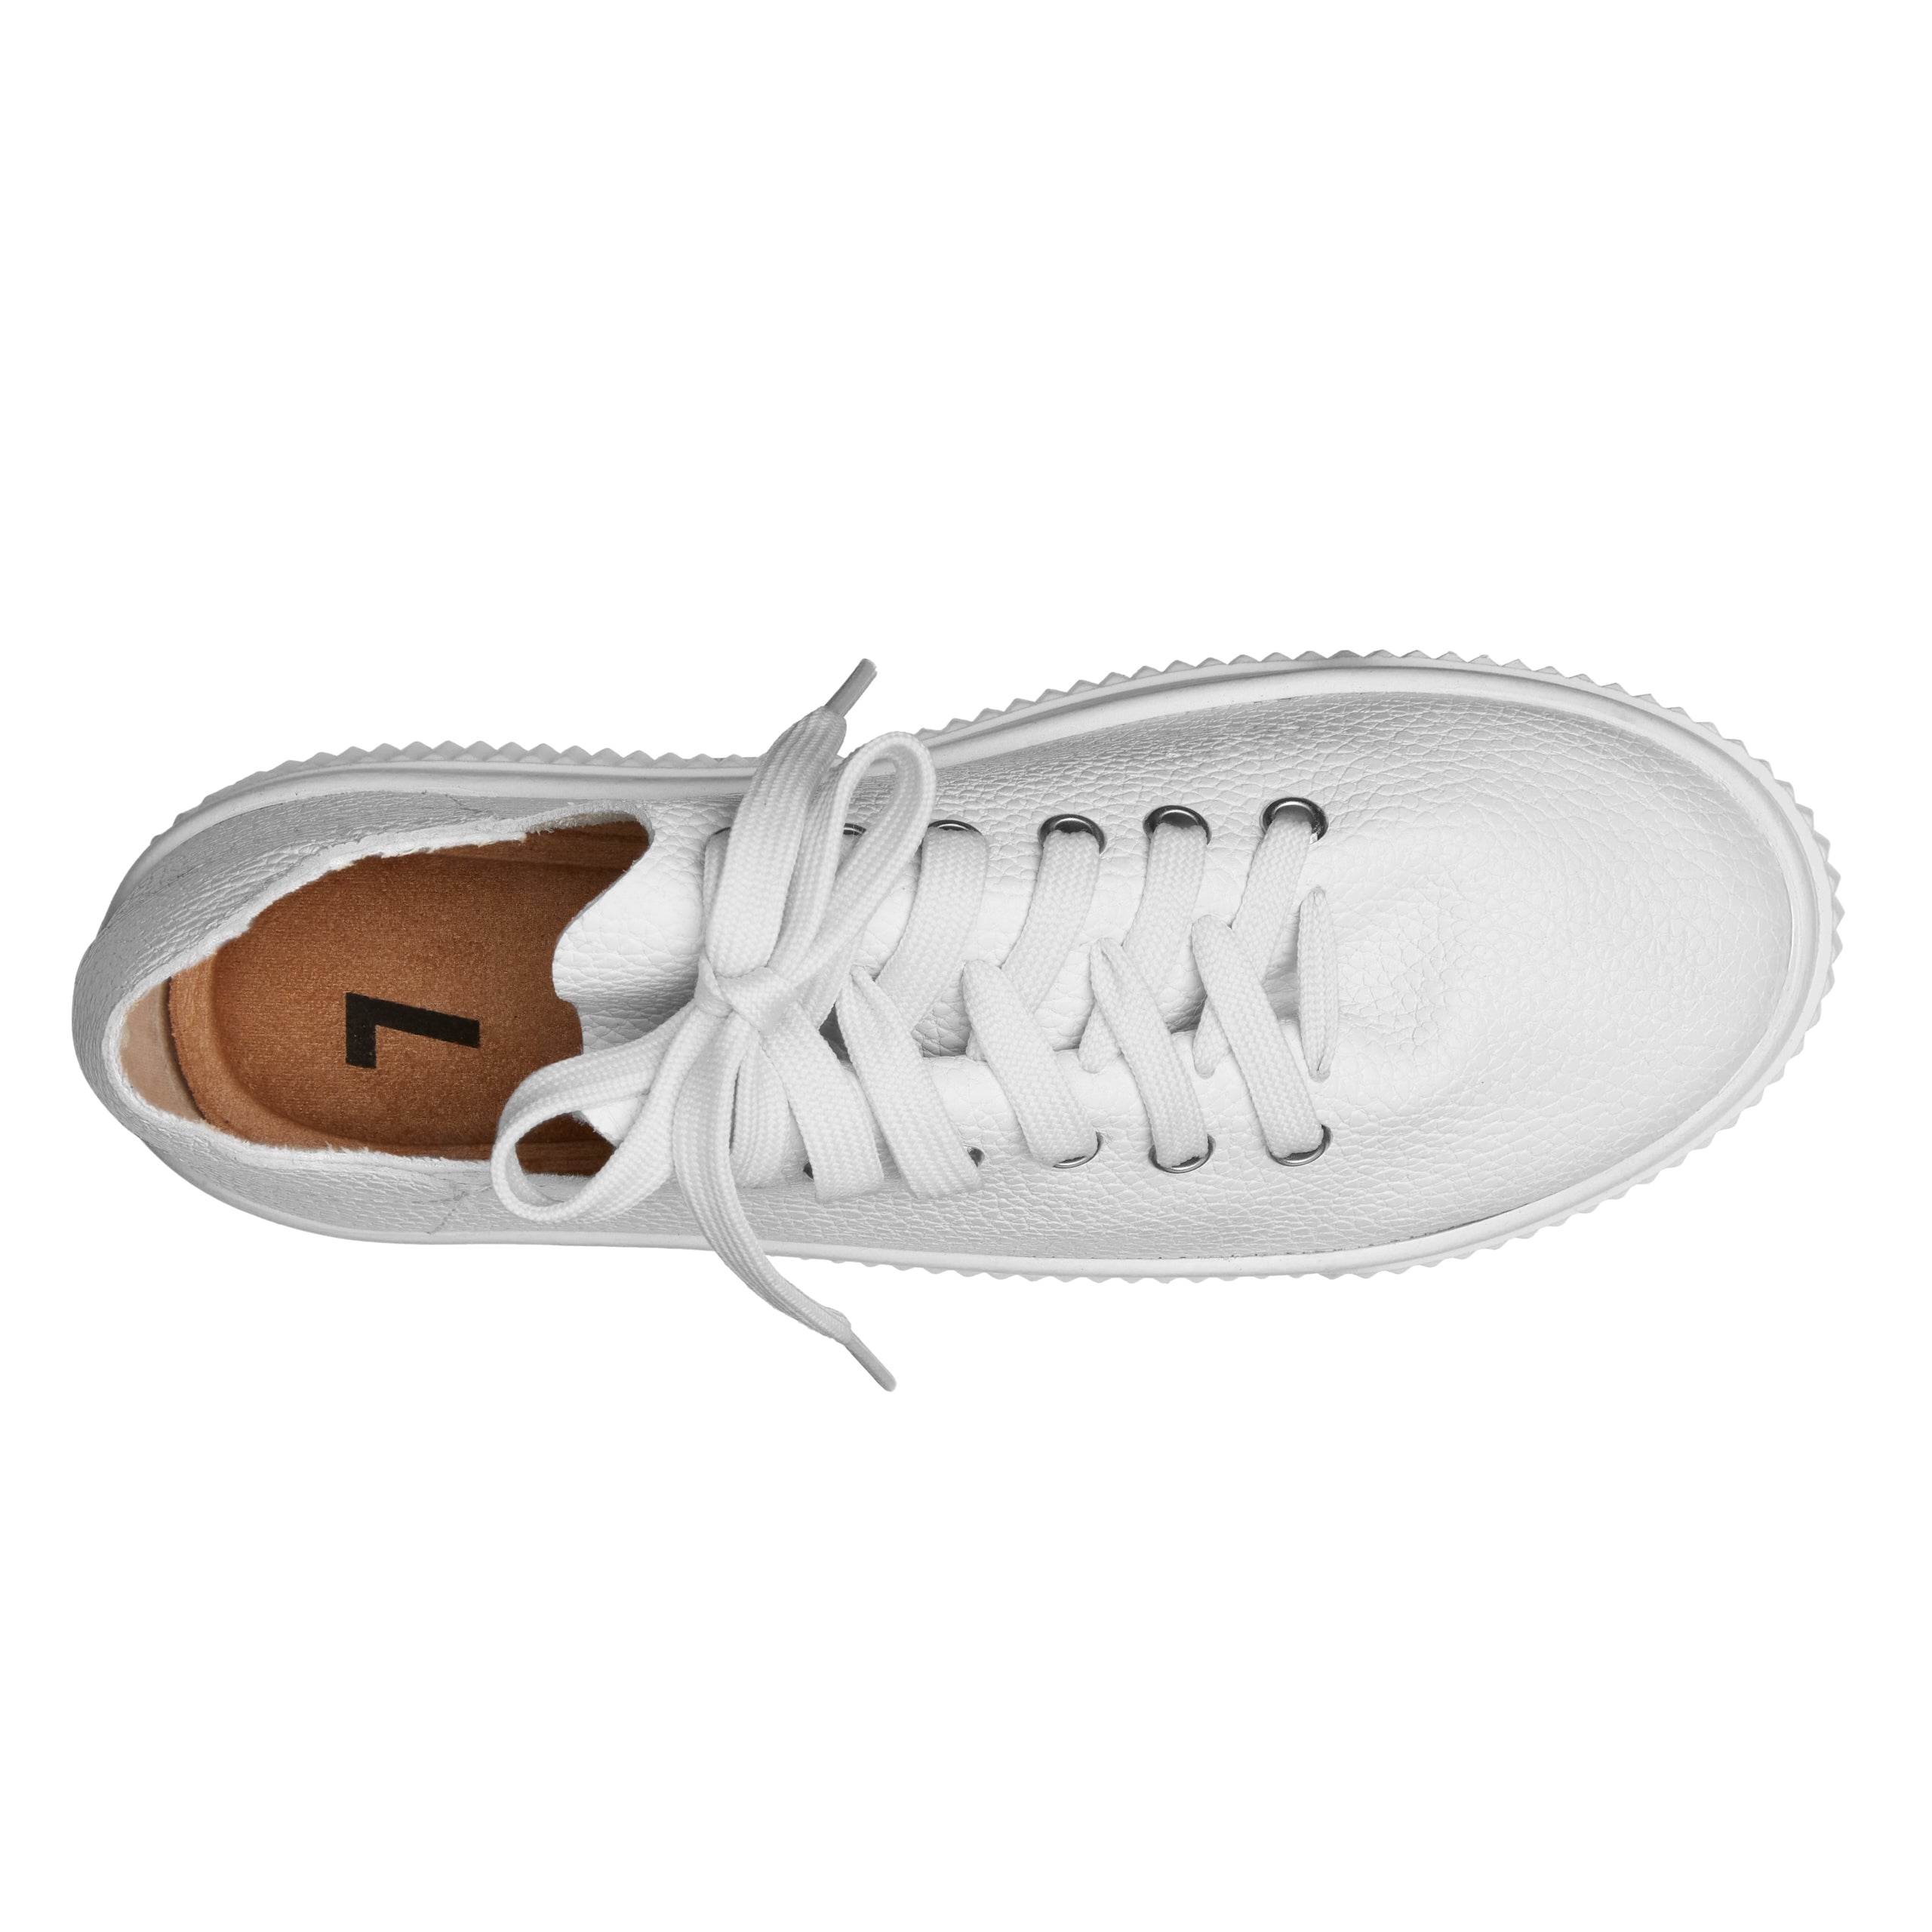 The Nude Leather Sneaker